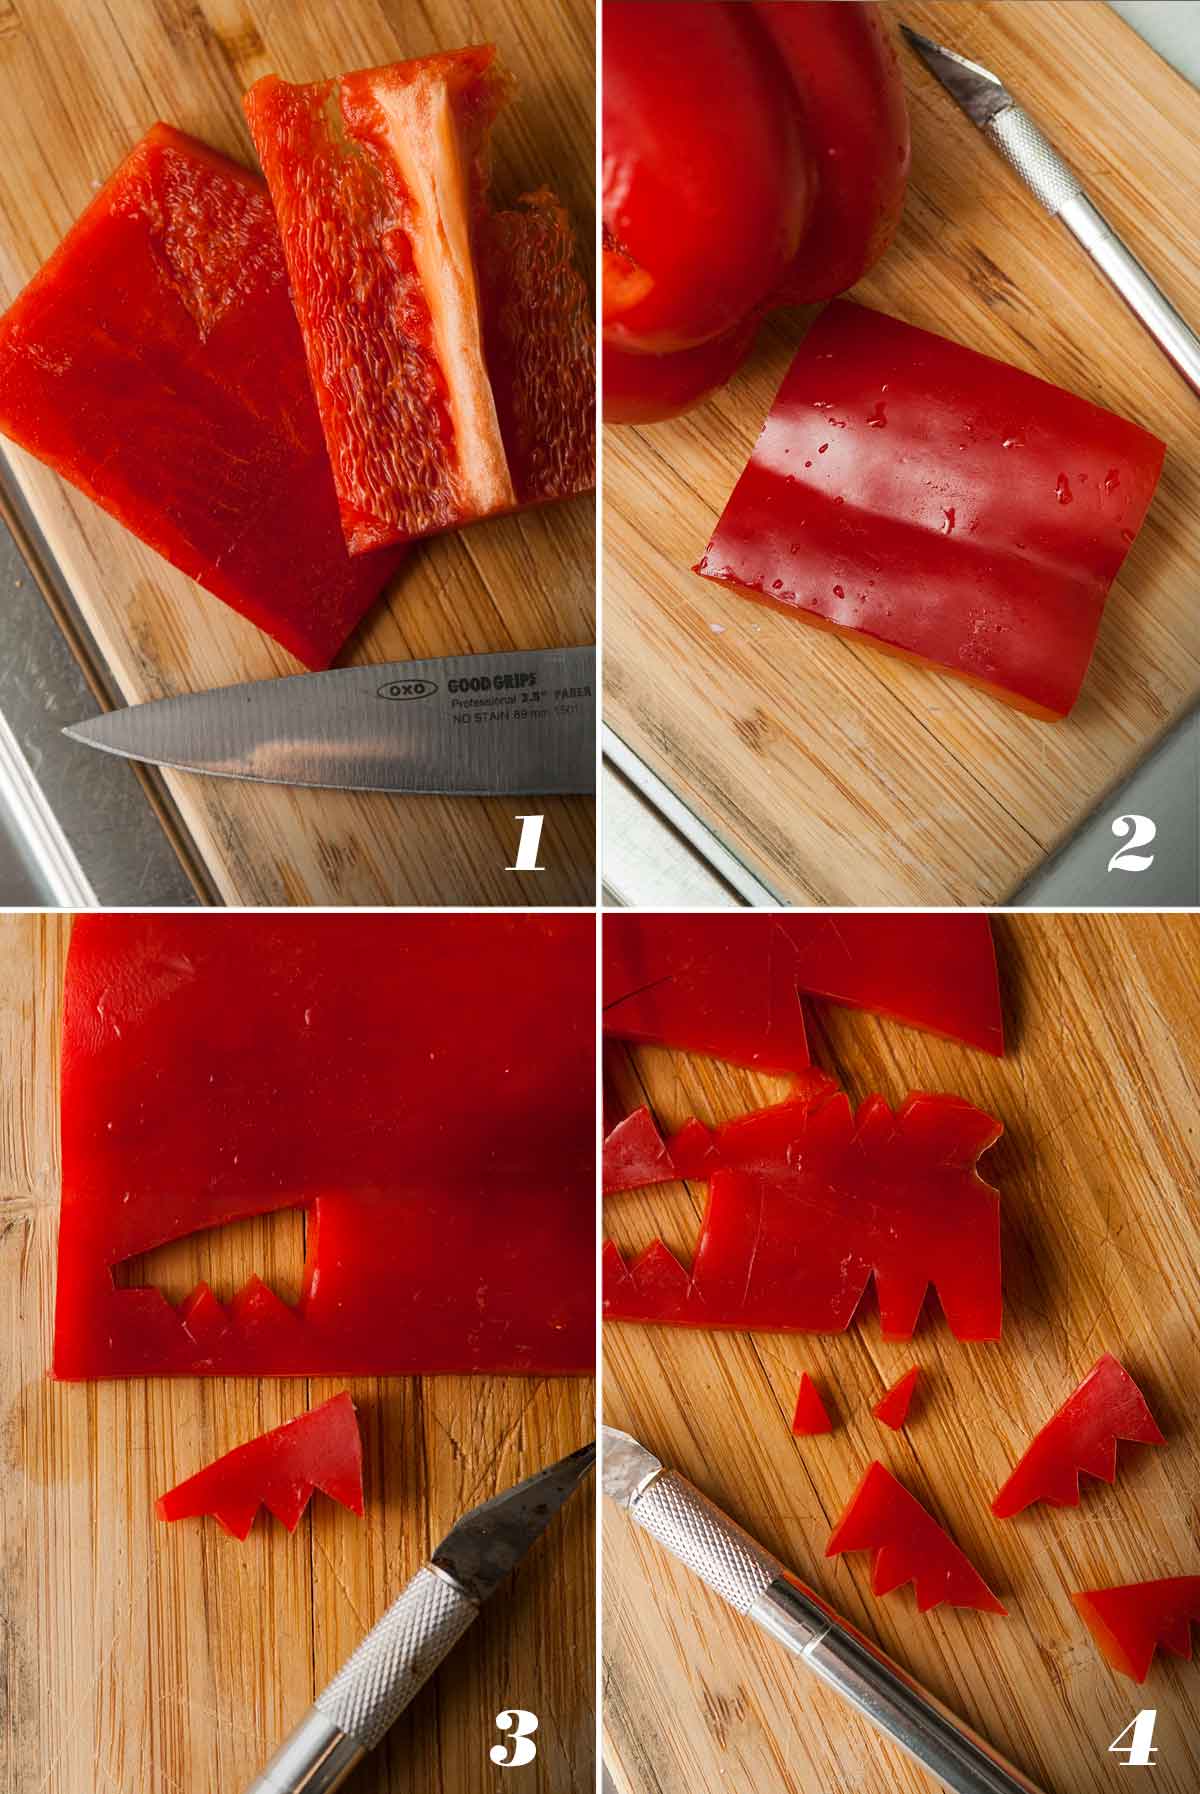 A collage of 4 numbered images showing how to make horns and wings out of red bell peppers.